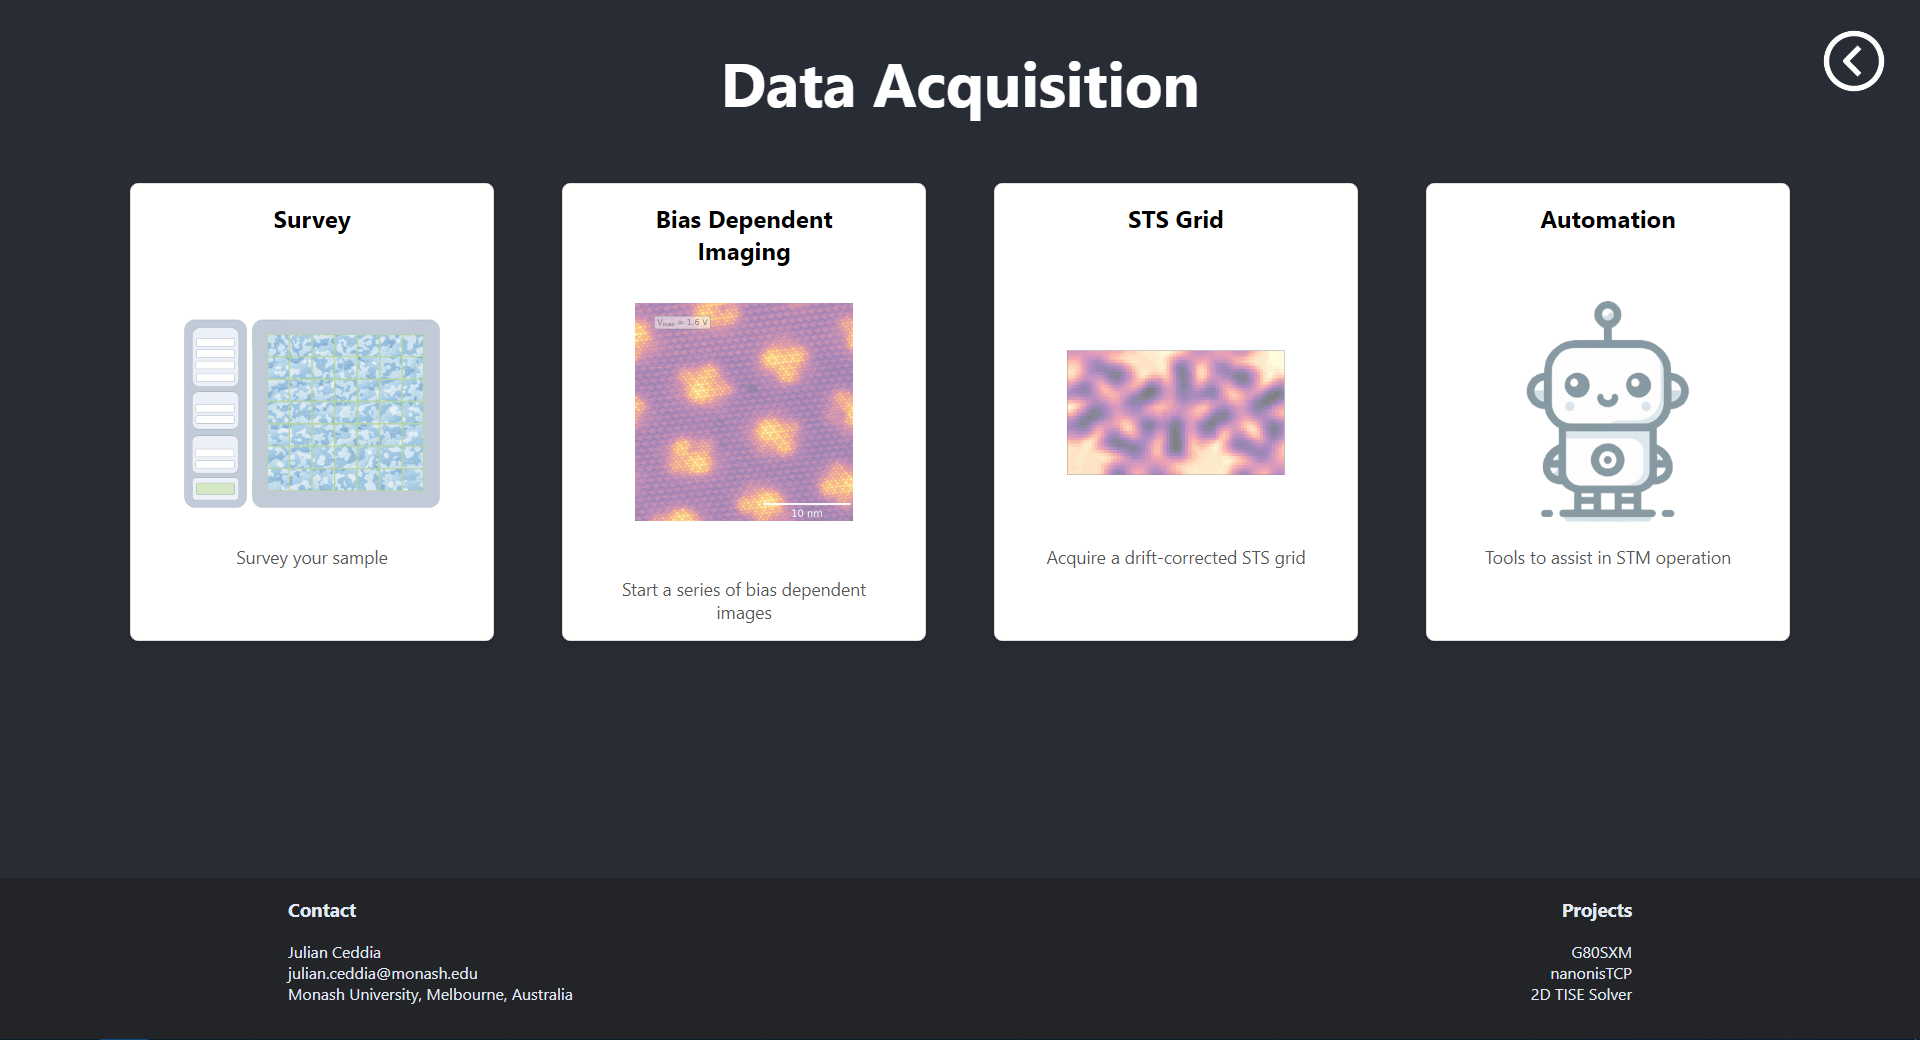 DataAcquisition